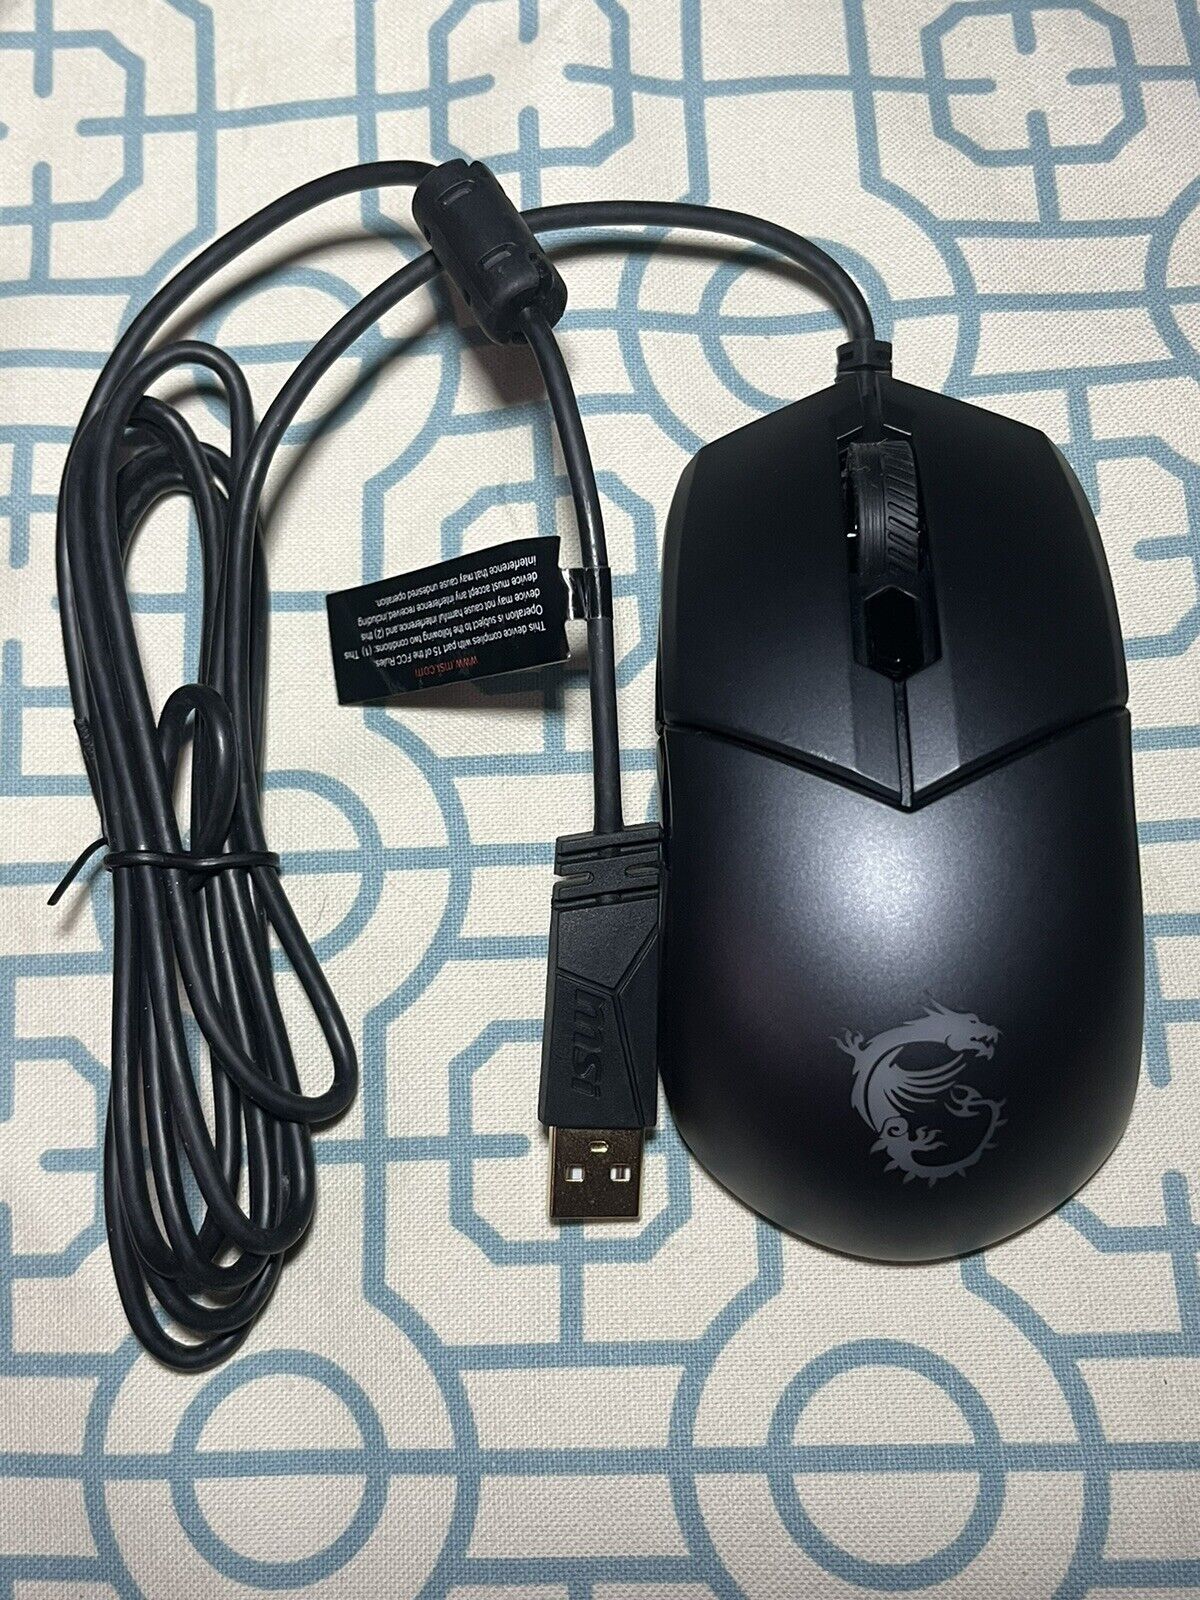 MSI Clutch GM11 Gaming Mouse RGB Color Changing TESTED OPTICAL SENSOR GRAPHITE